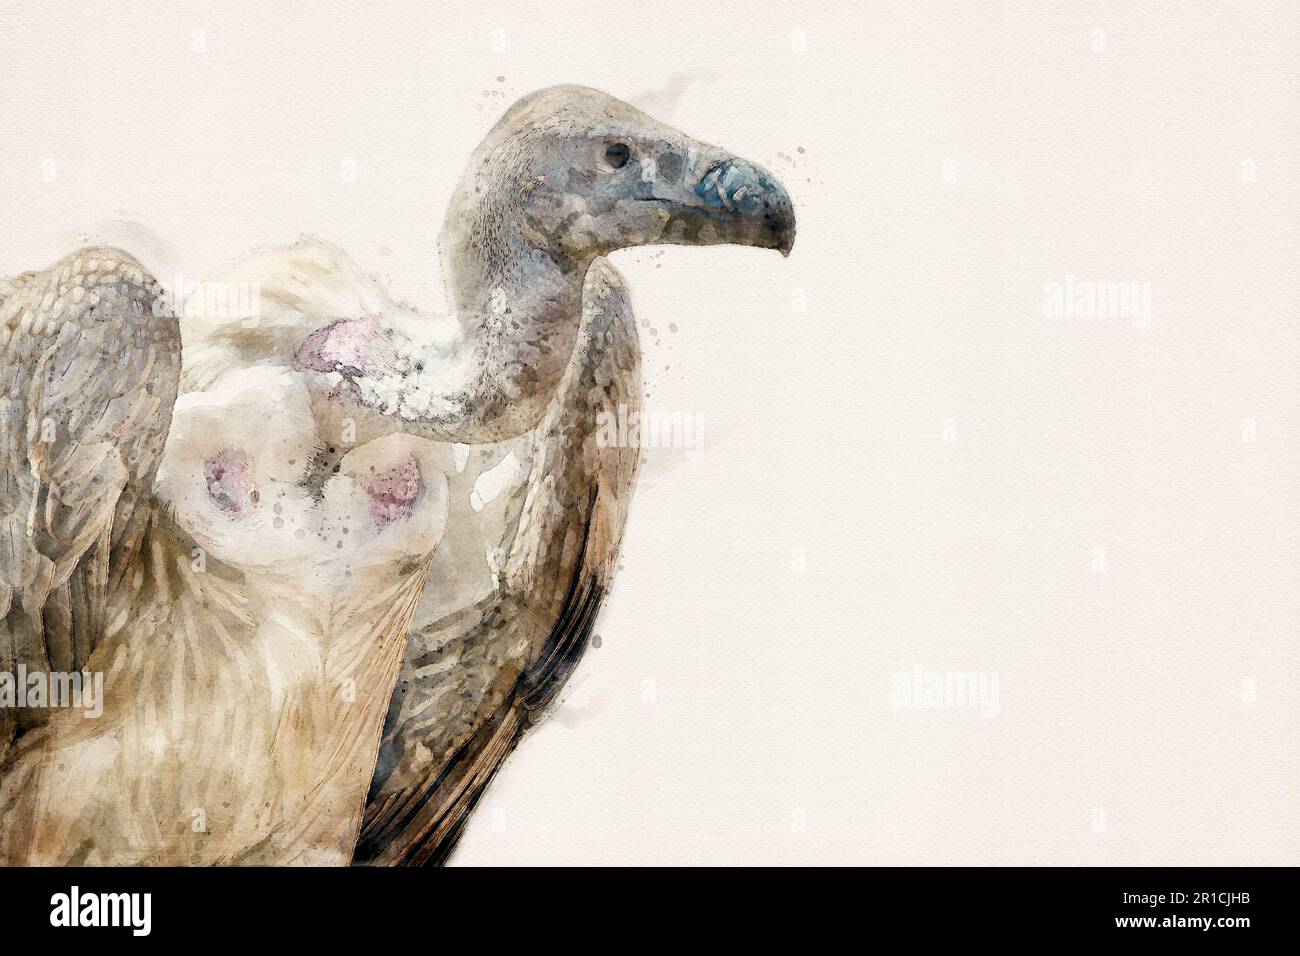 Griffon vulture. Portrait of Eurasian griffon vulture. Vulture bird. Bird of prey, isolated with copy space. Aquarelle, watercolor illustration. Stock Photo